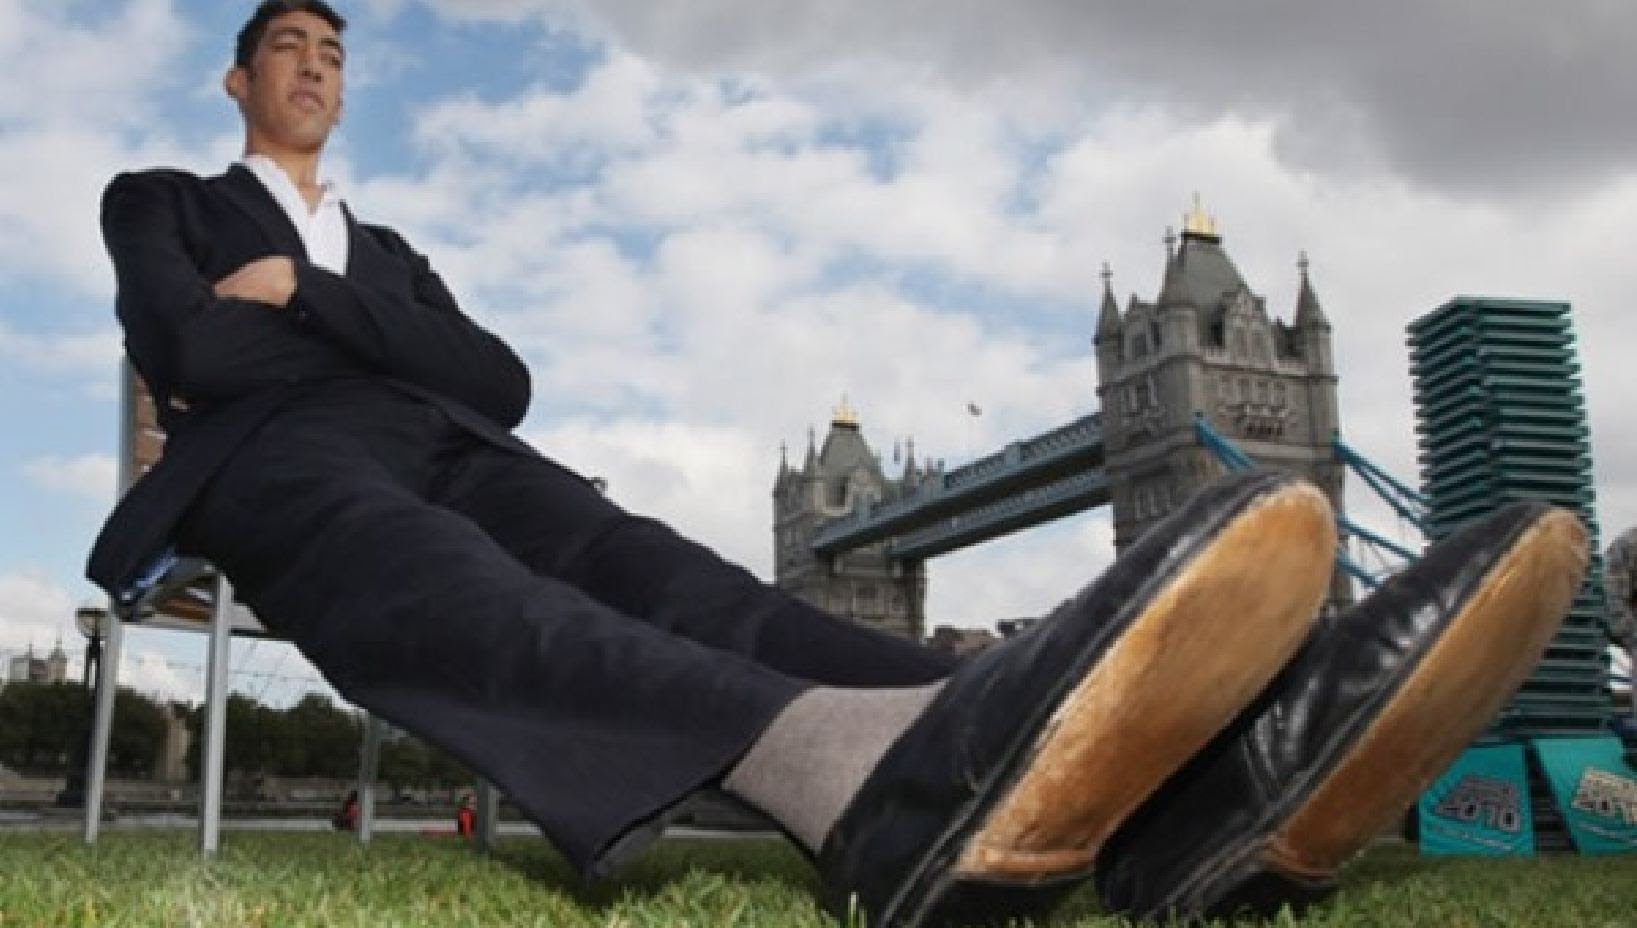 Meet The World`s Tallest Man Living Who Made it in The Guinness World